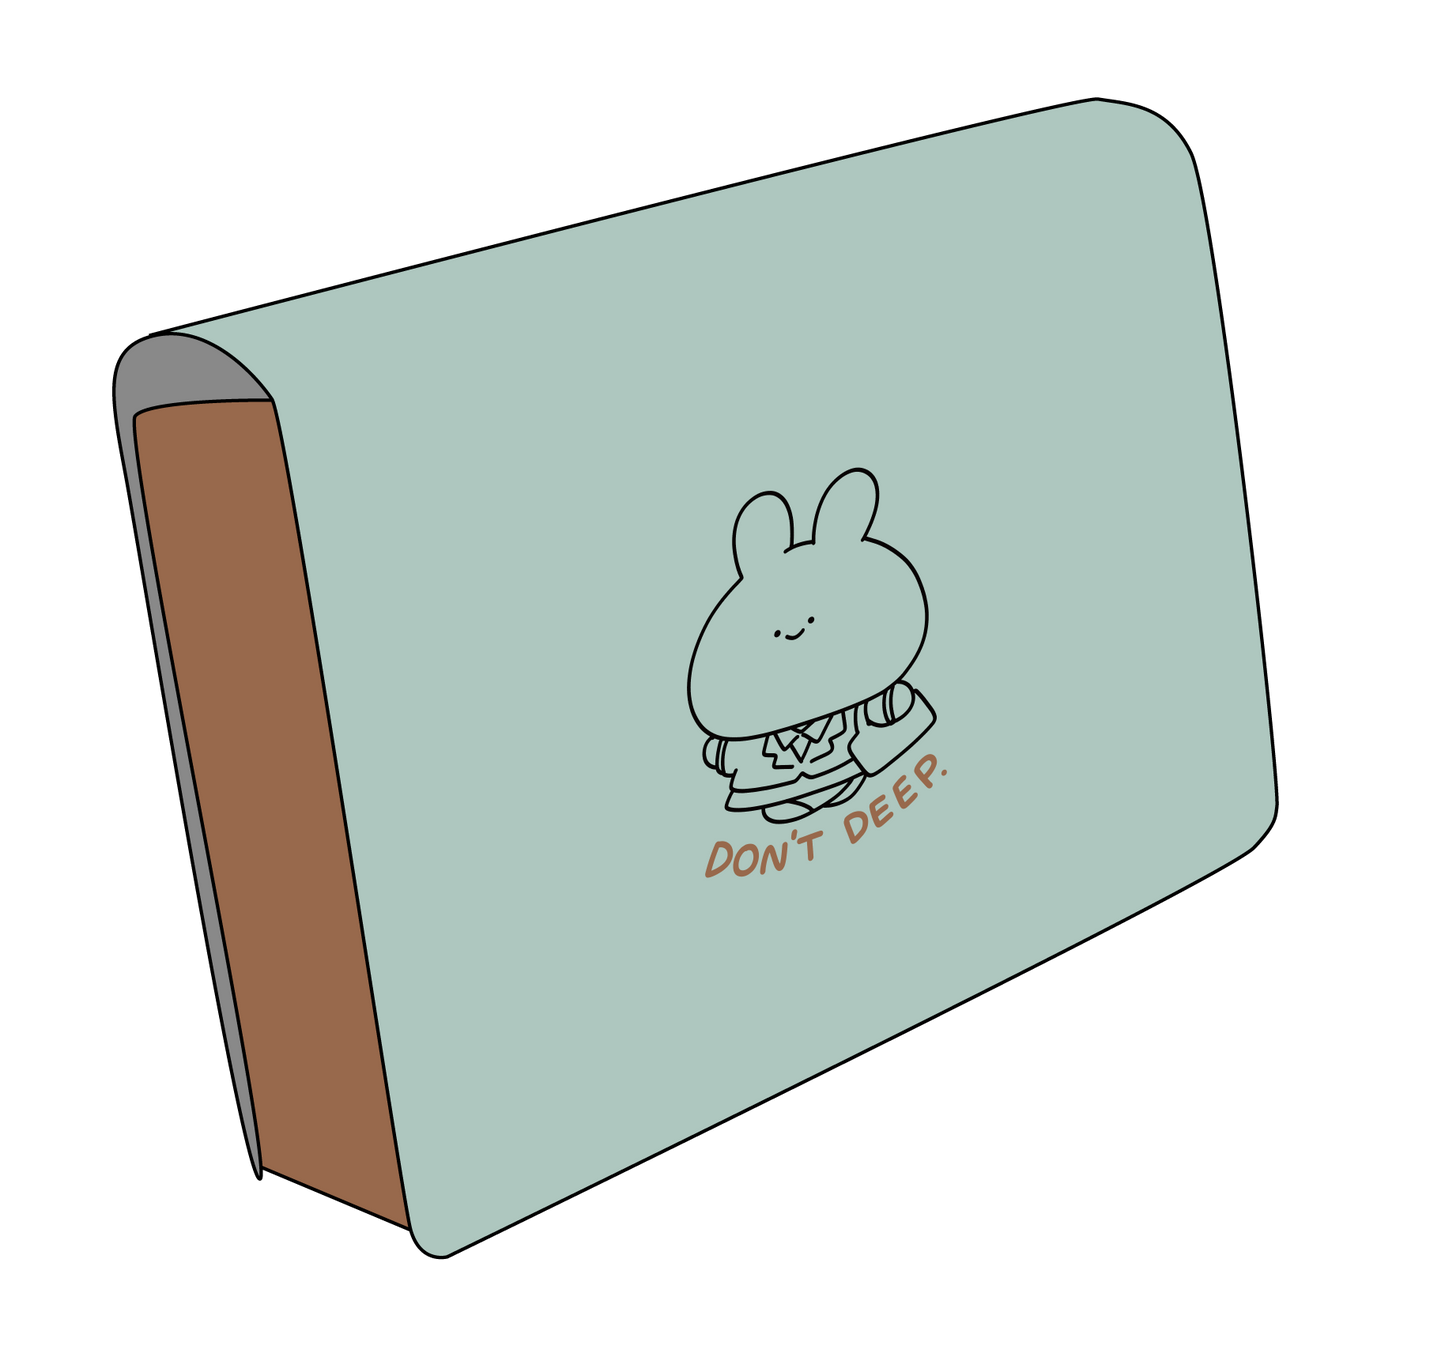 [Asamimi-chan] Asamimi's business card case with business card (spring butt)